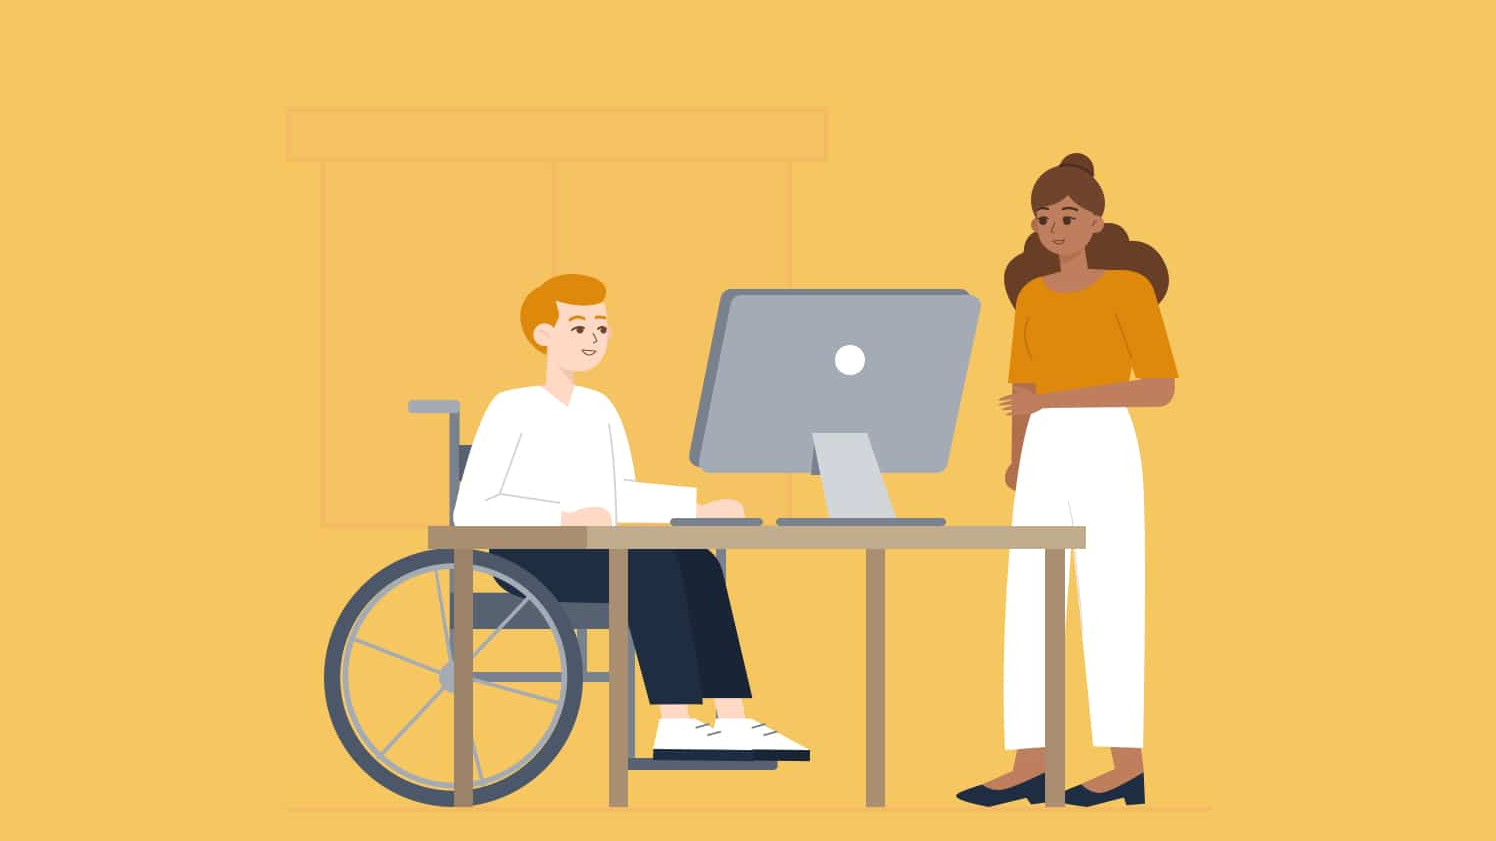 Ableism is a subtle but important bias for recruiters to address